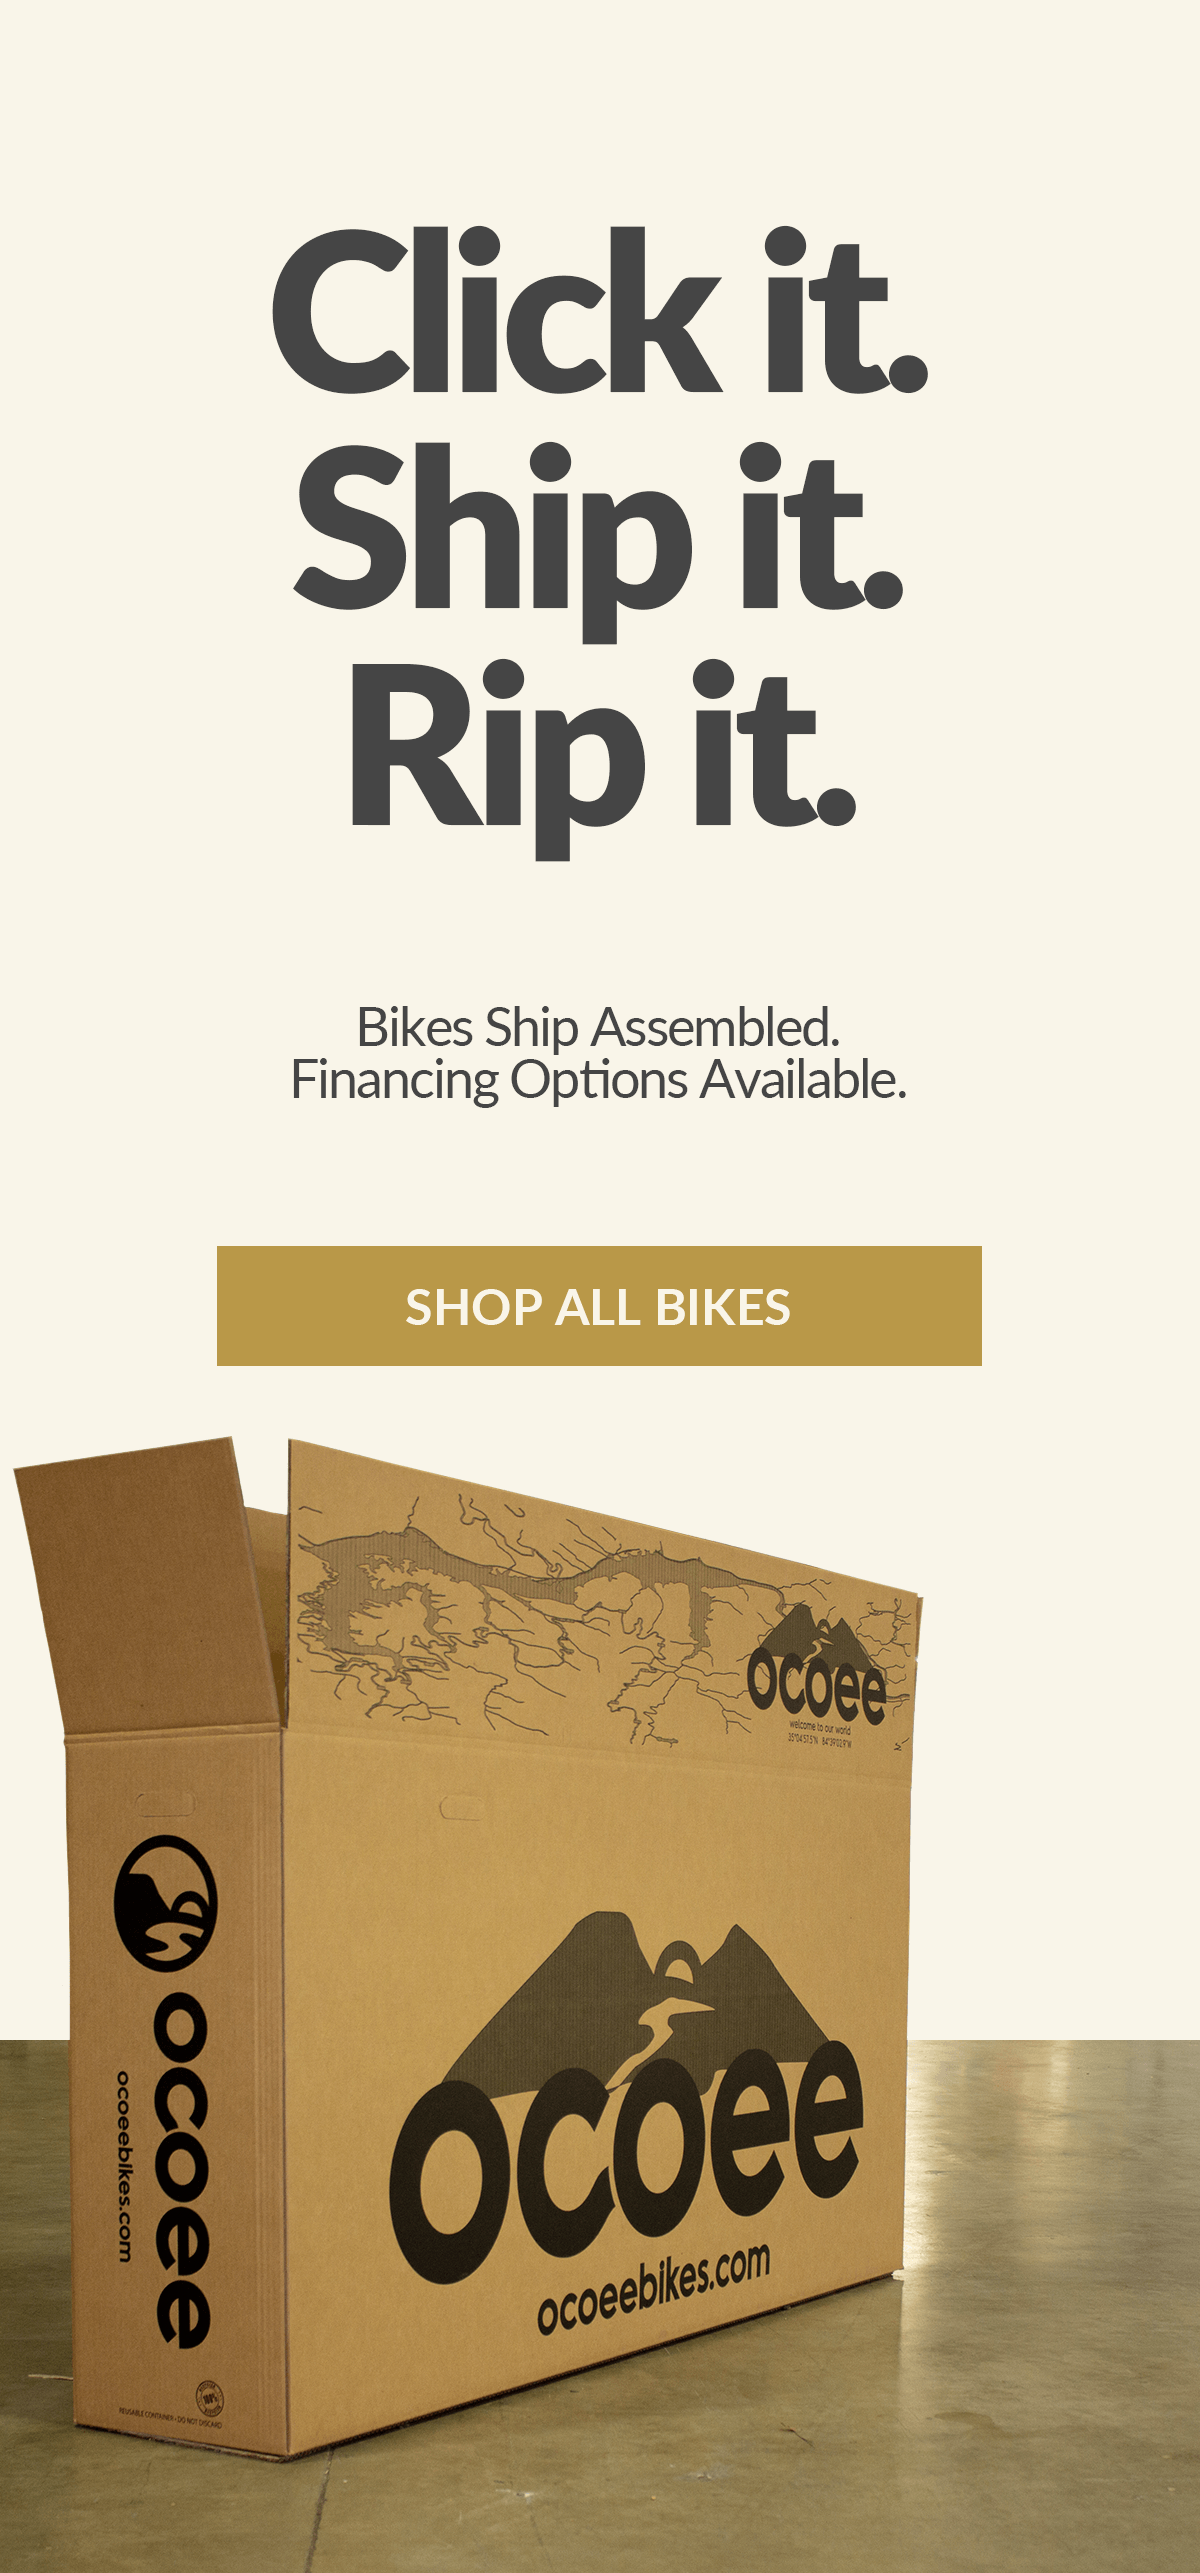 Click it. Ship it. Rip it. Bikes ship assembled and financing options are available. Shop all Ocoee bikes now!